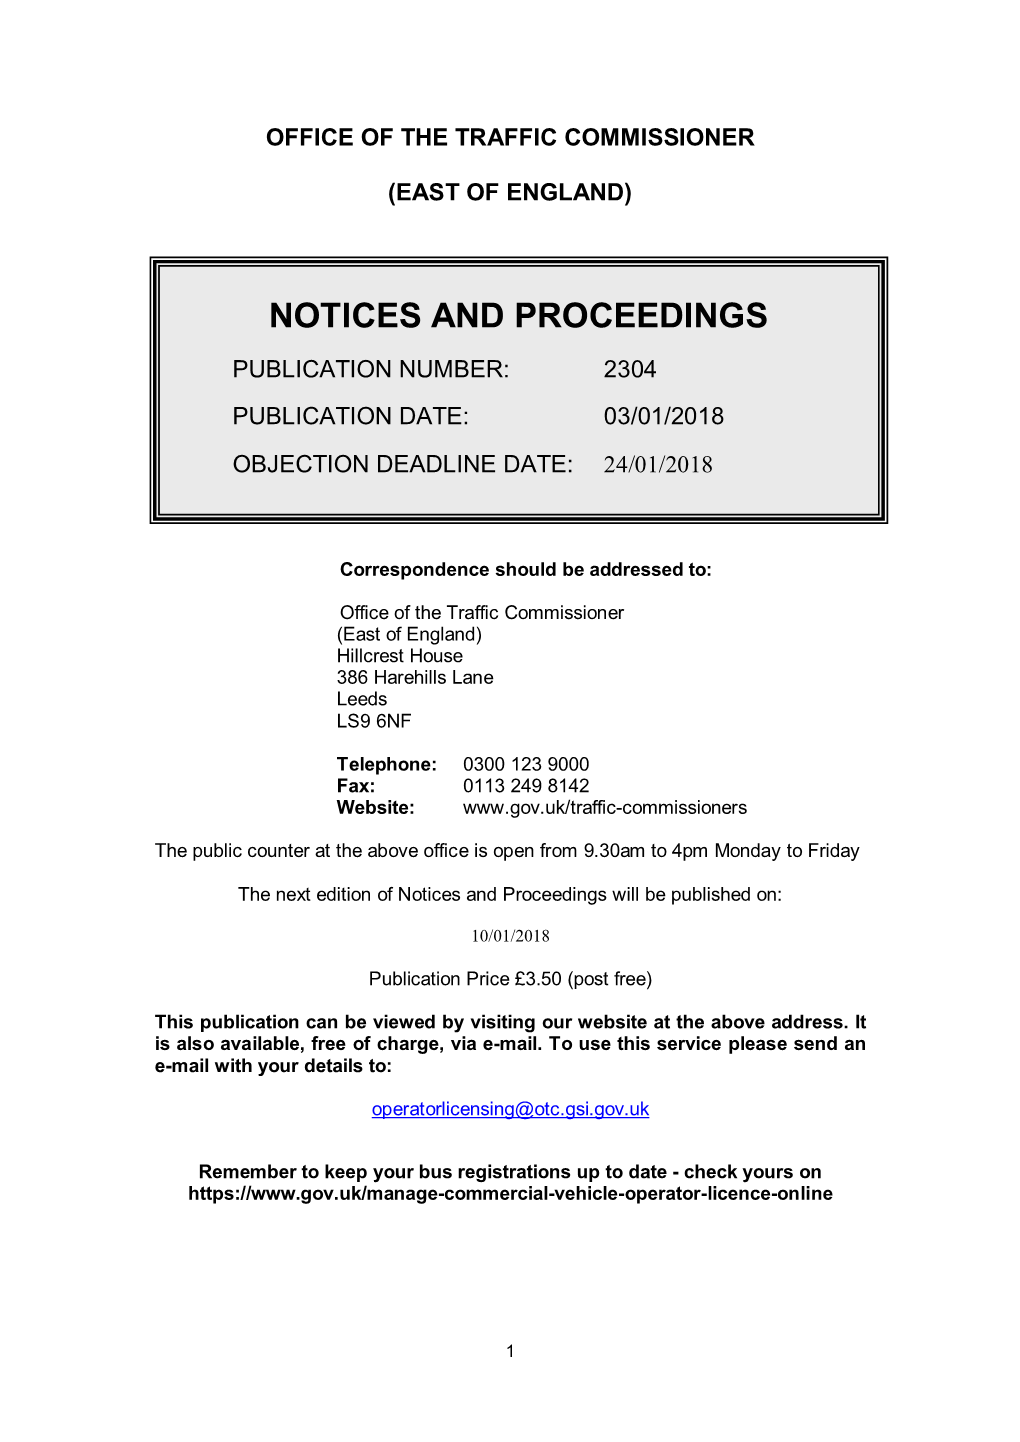 Notices and Proceedings 2304: Office of the Traffic Commissioner, East of England